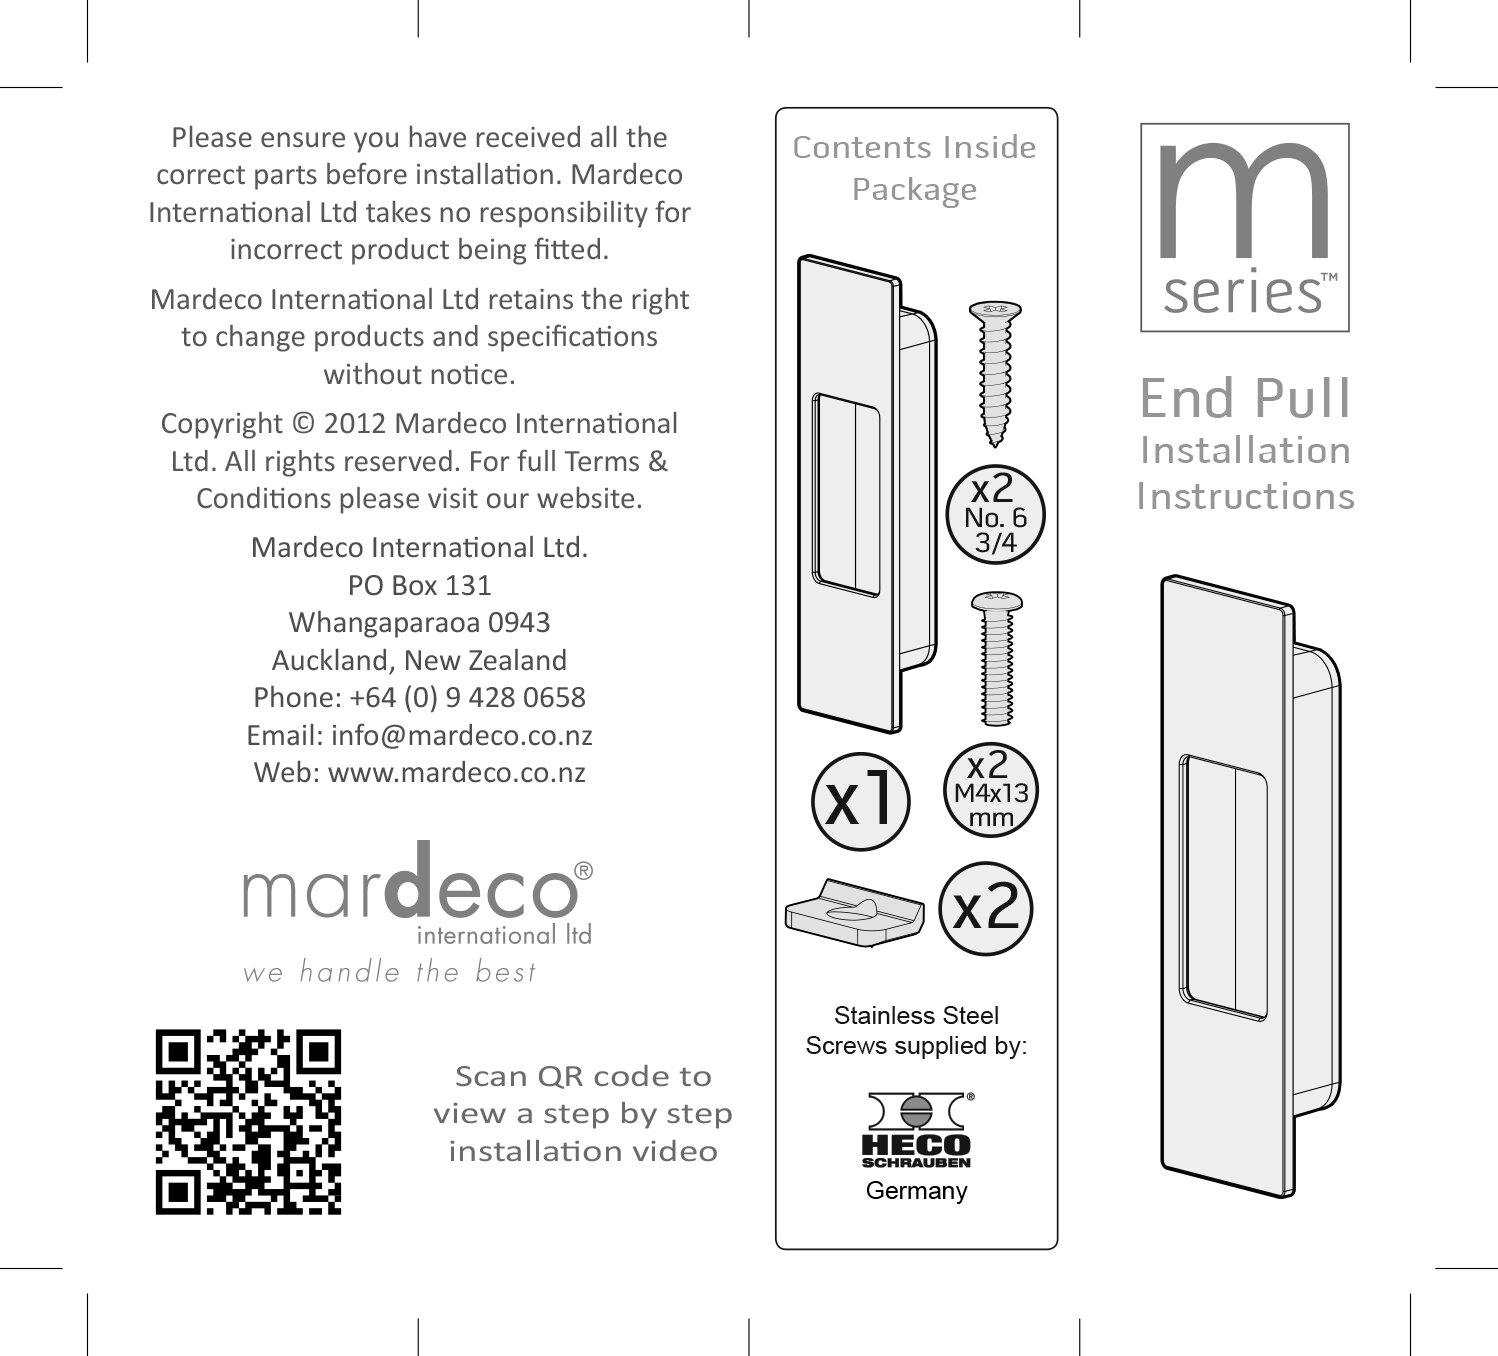 Mardeco 8001 End Pull fitting instructions